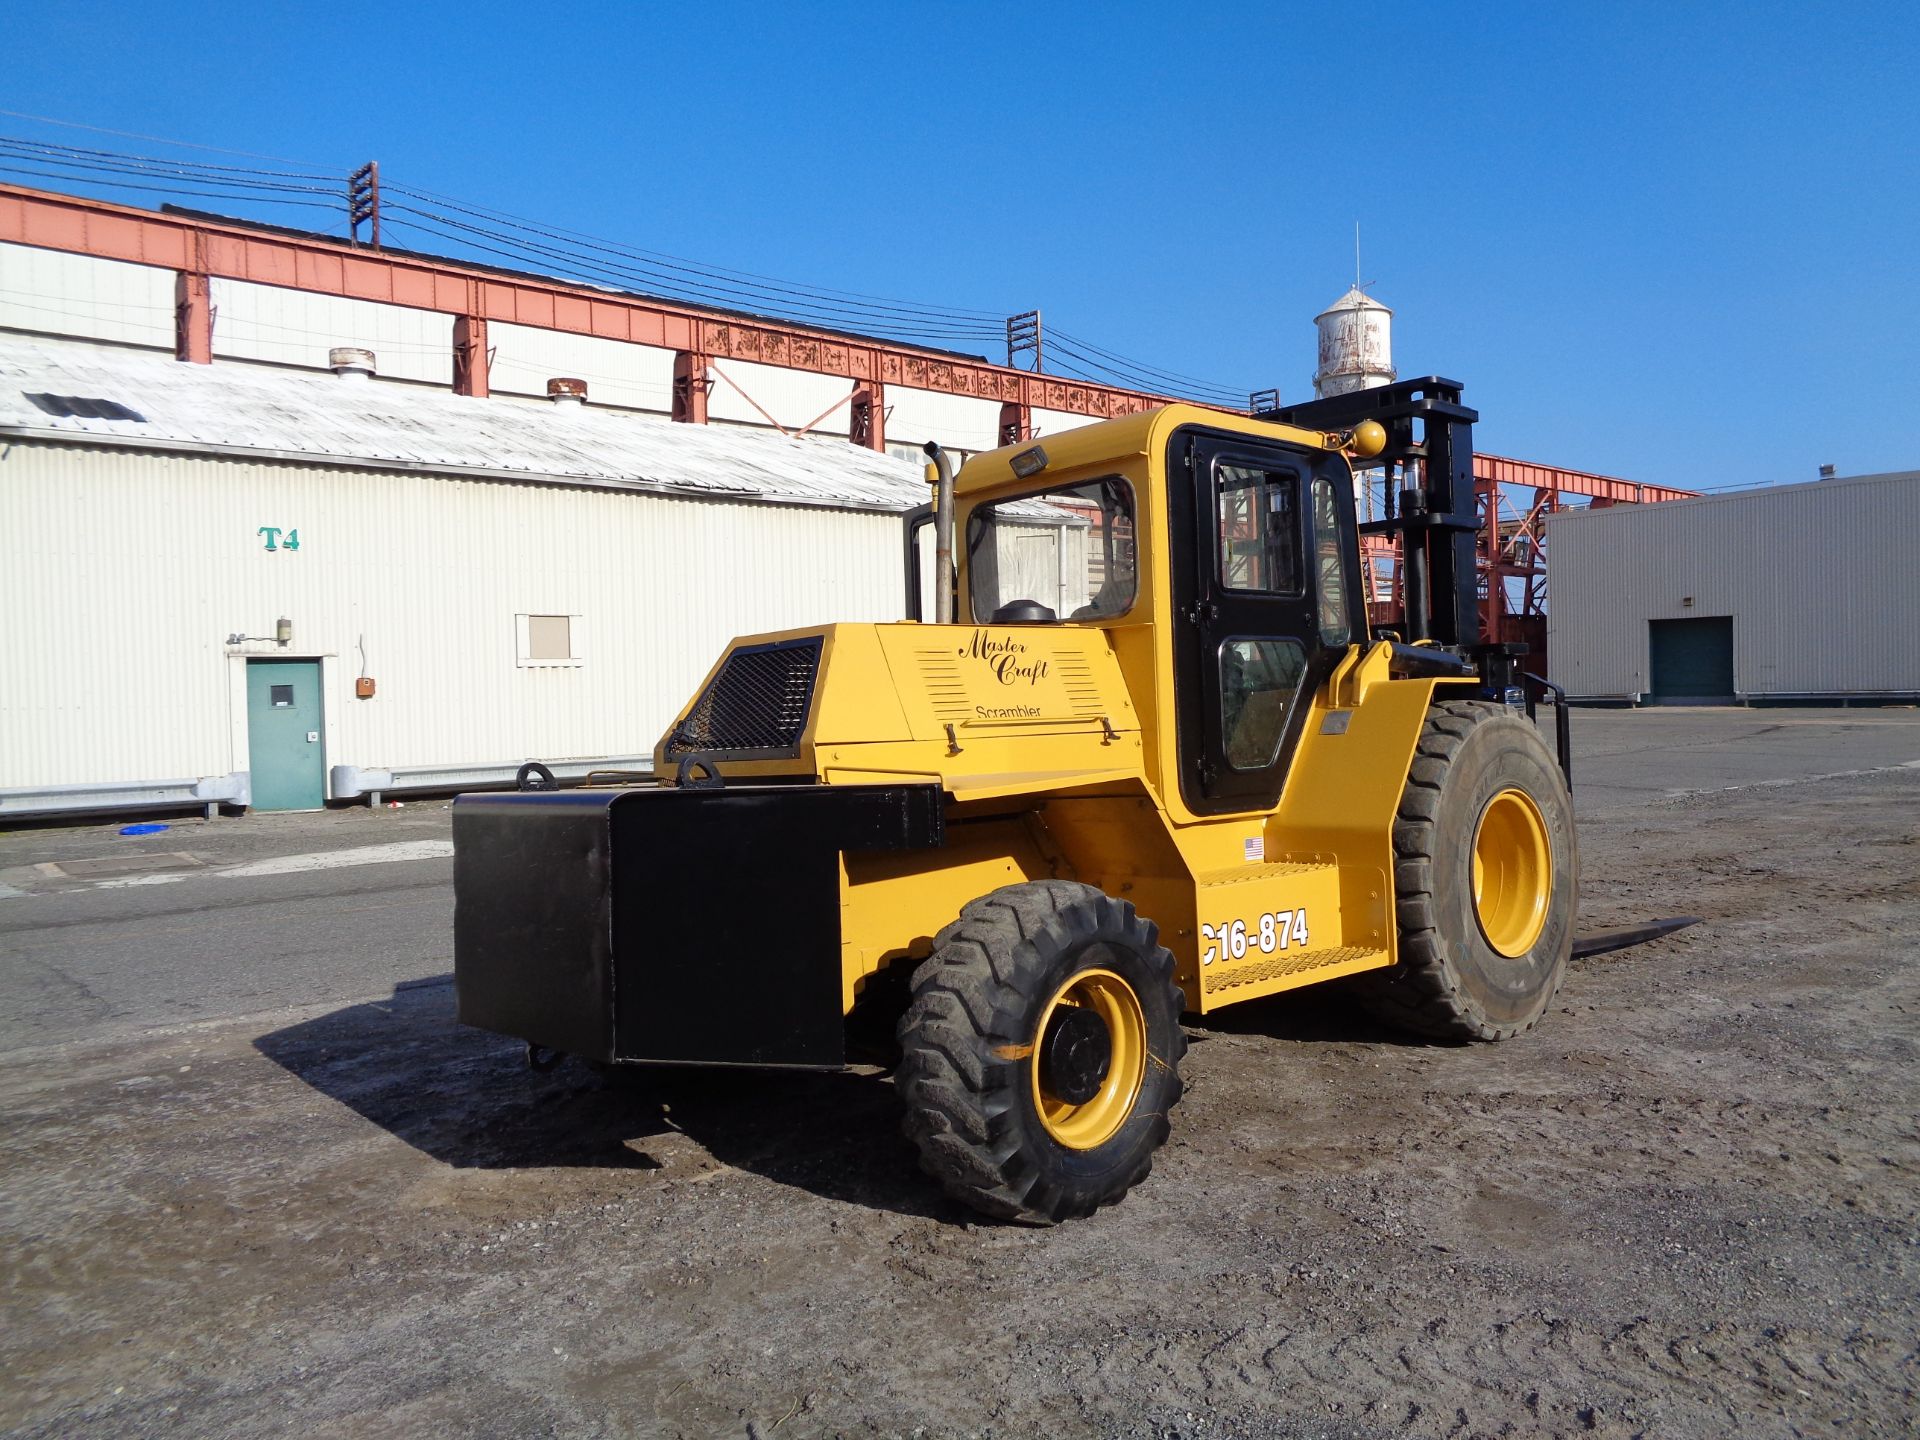 2008 Master Craft C16.874 16,000 lbs Rough Terrain 4x4 Forklift - Image 11 of 12